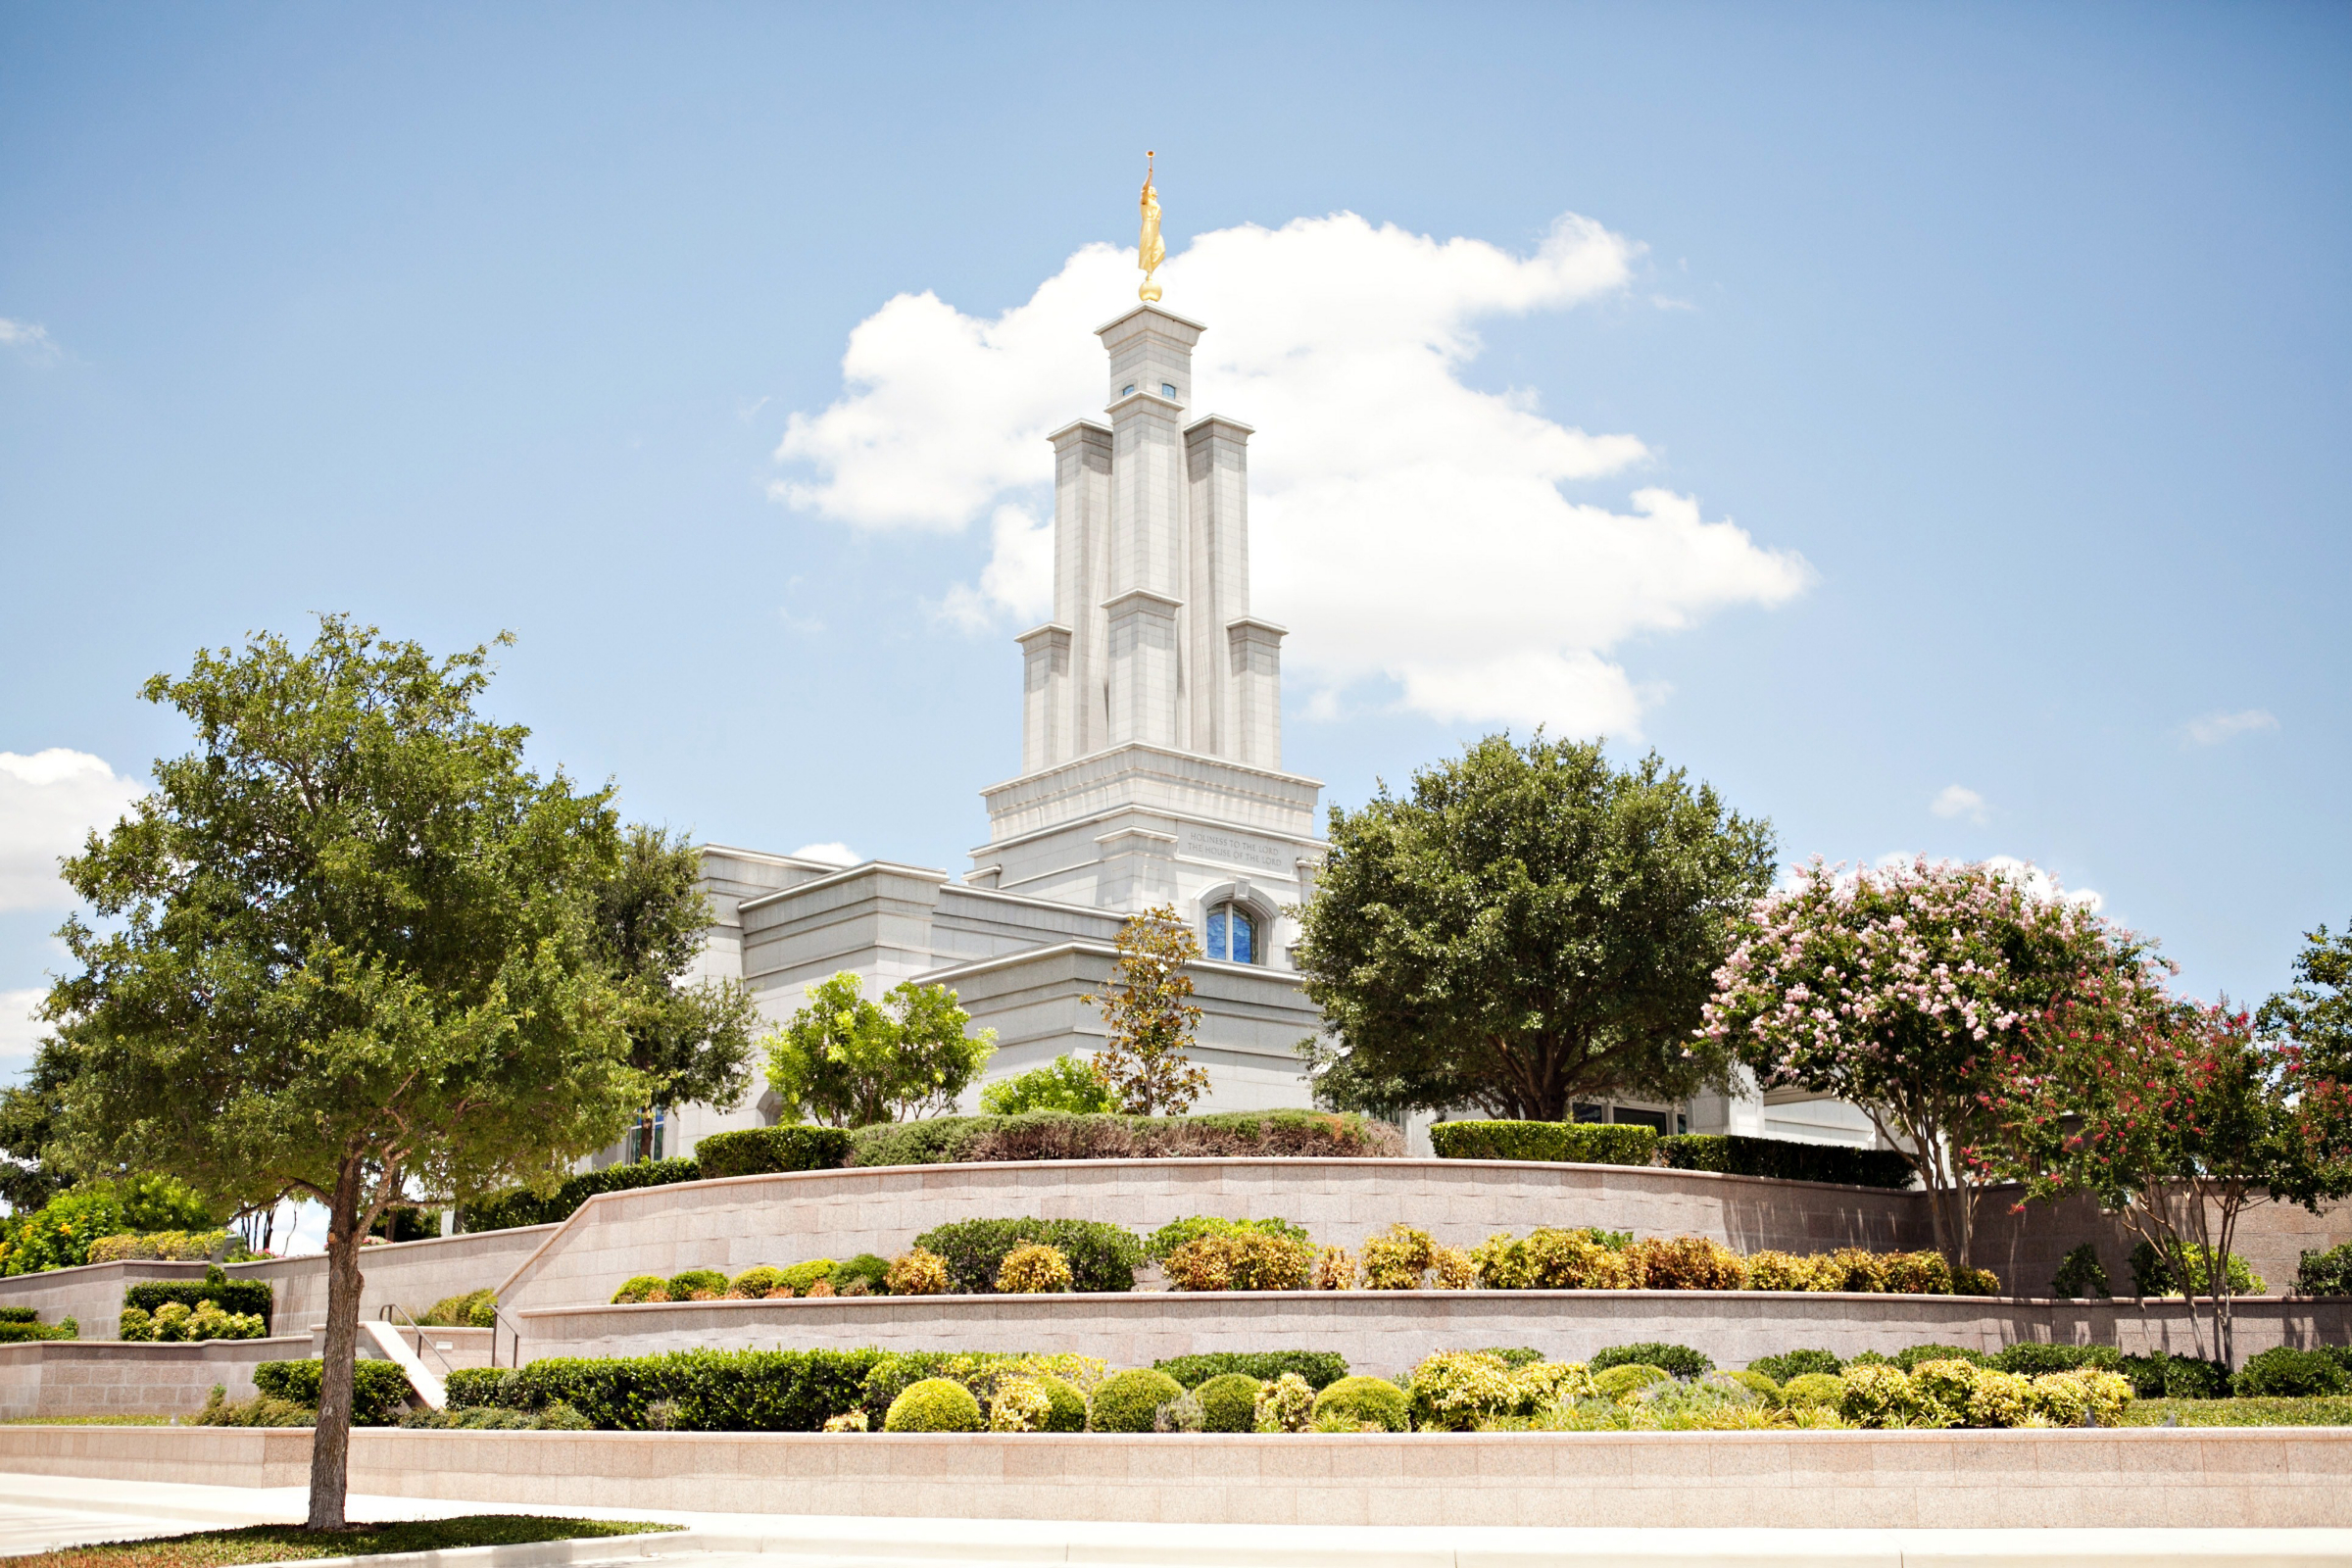 The Church of Jesus Christ of Latter-Day Saints | 718 S Mcdonnell Ave, Los Angeles, CA, 90022 | +1 (323) 266-1197